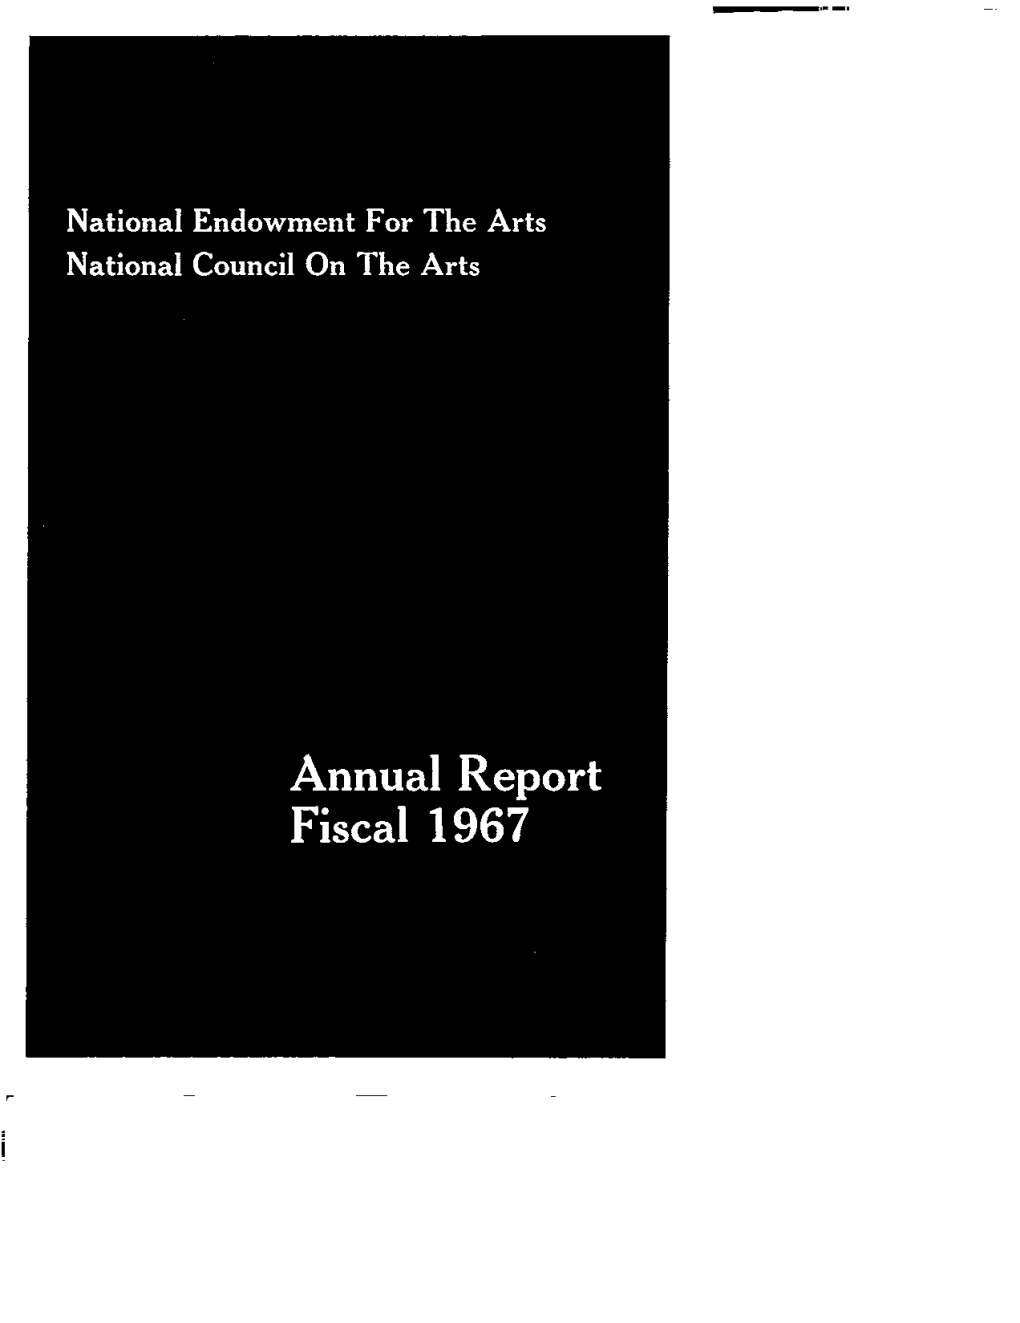 National Endowment for the Arts Annual Report 1967